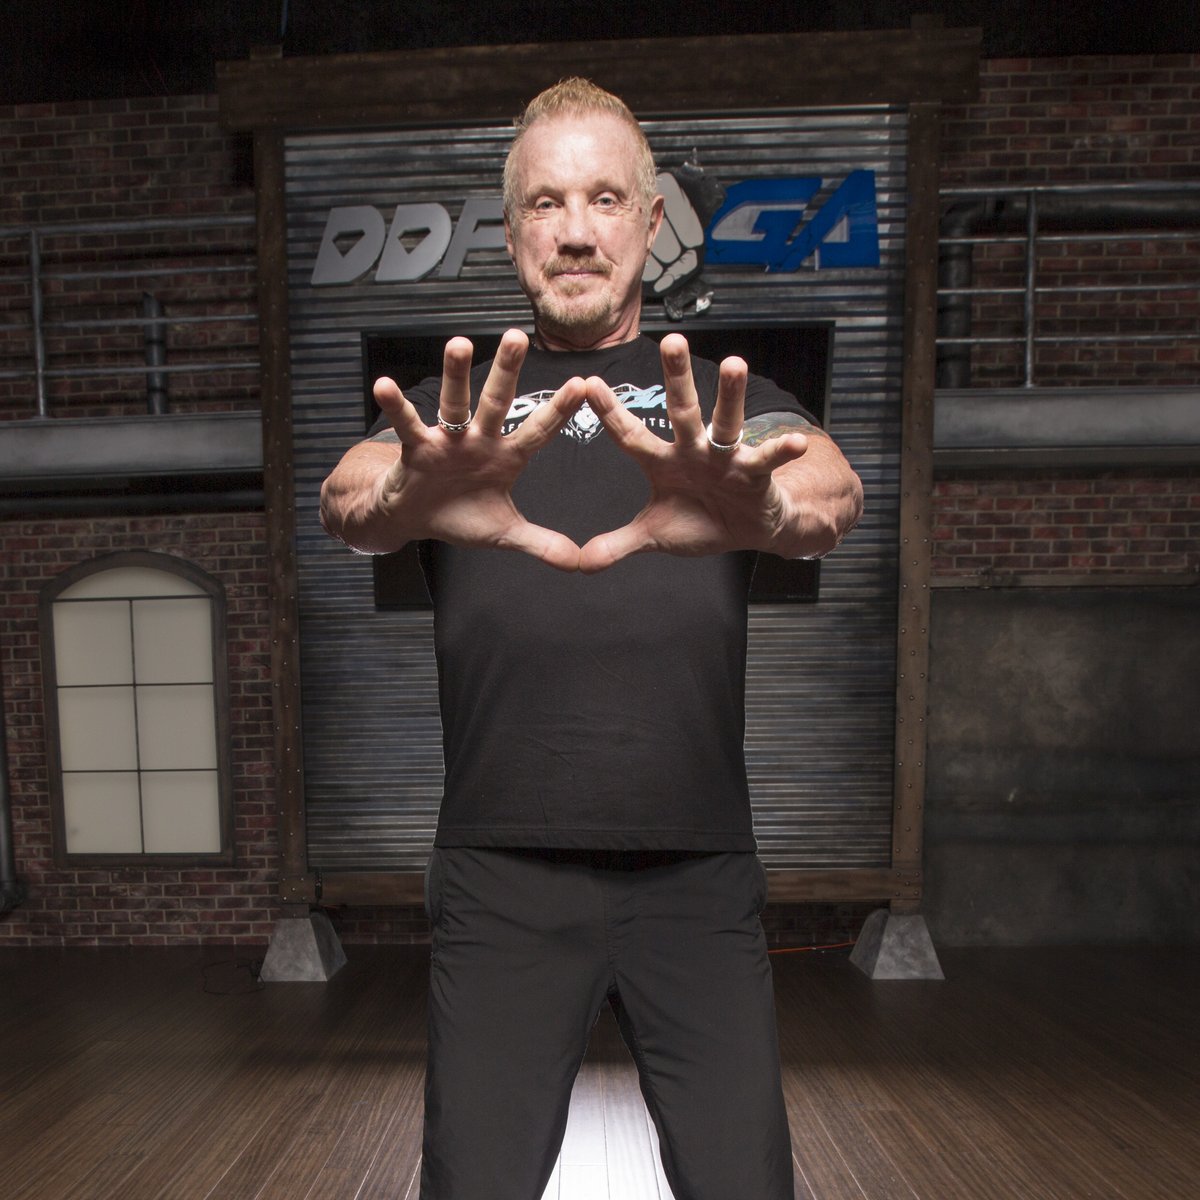 Diamond Dallas Page Tells His Story: From Professional Wrestling